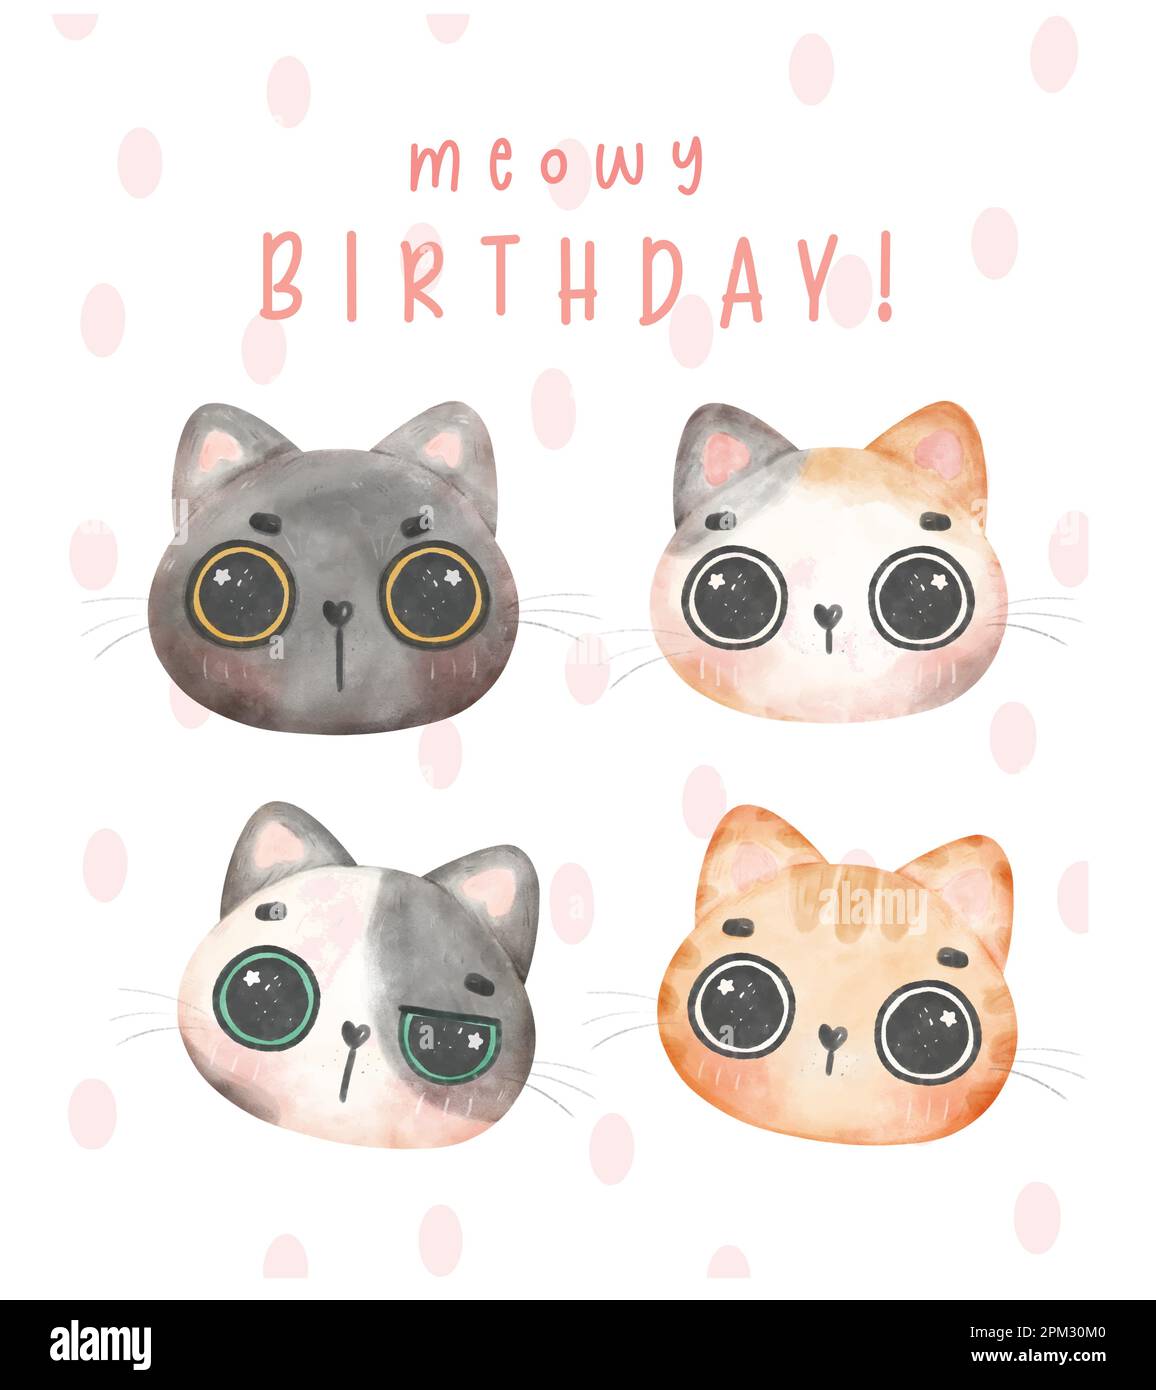 Group of adorable kitten cats head in different breeds Meowy birthday watercolor illustration greeting card Stock Vector